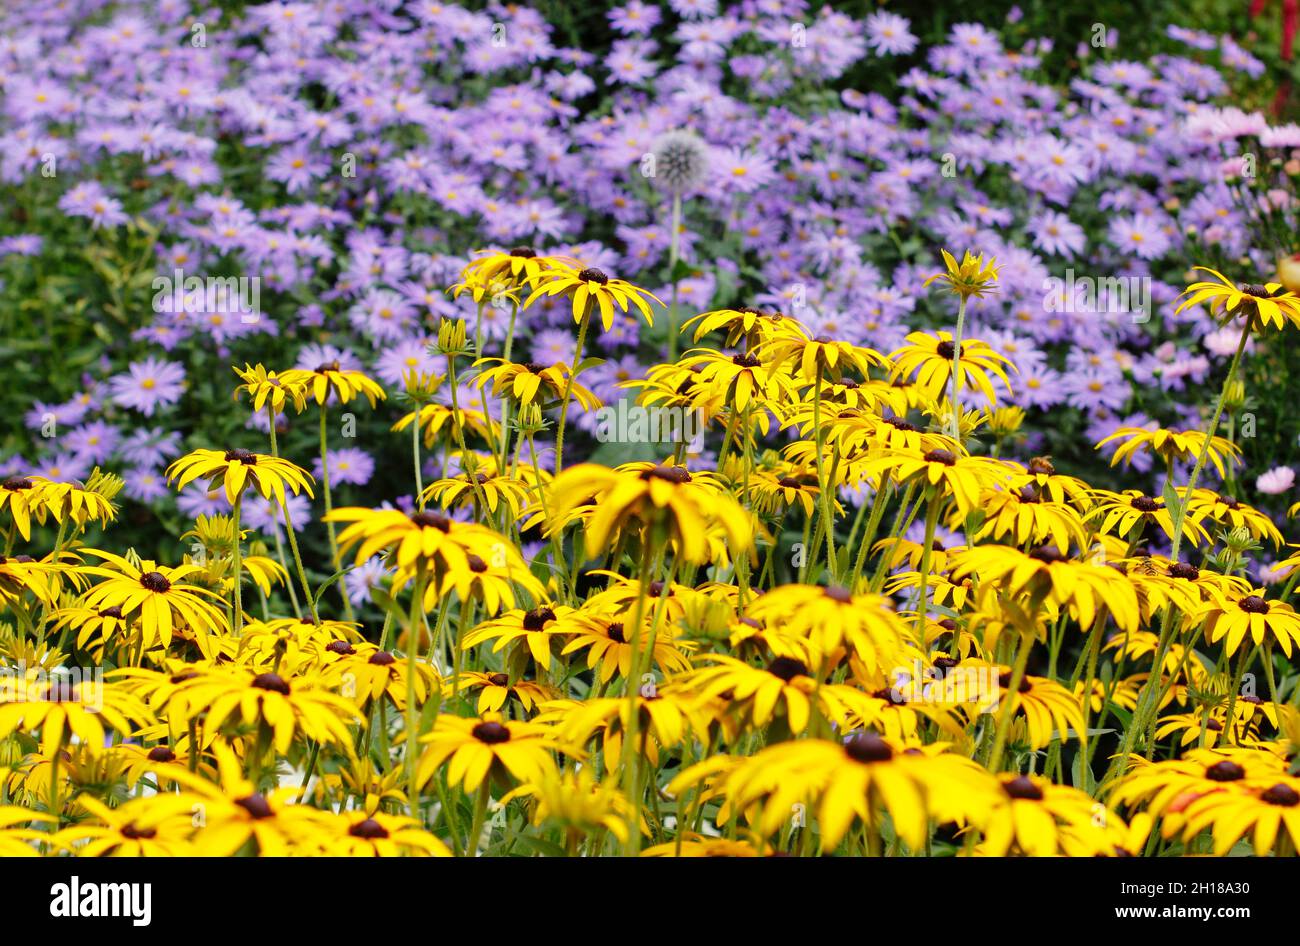 Rudbeckia and aster in a September garden border. Yellow rudbeckia 'Goldstrurm' and aster frikartii 'Monch'. Rudbeckias and asters. UK Stock Photo